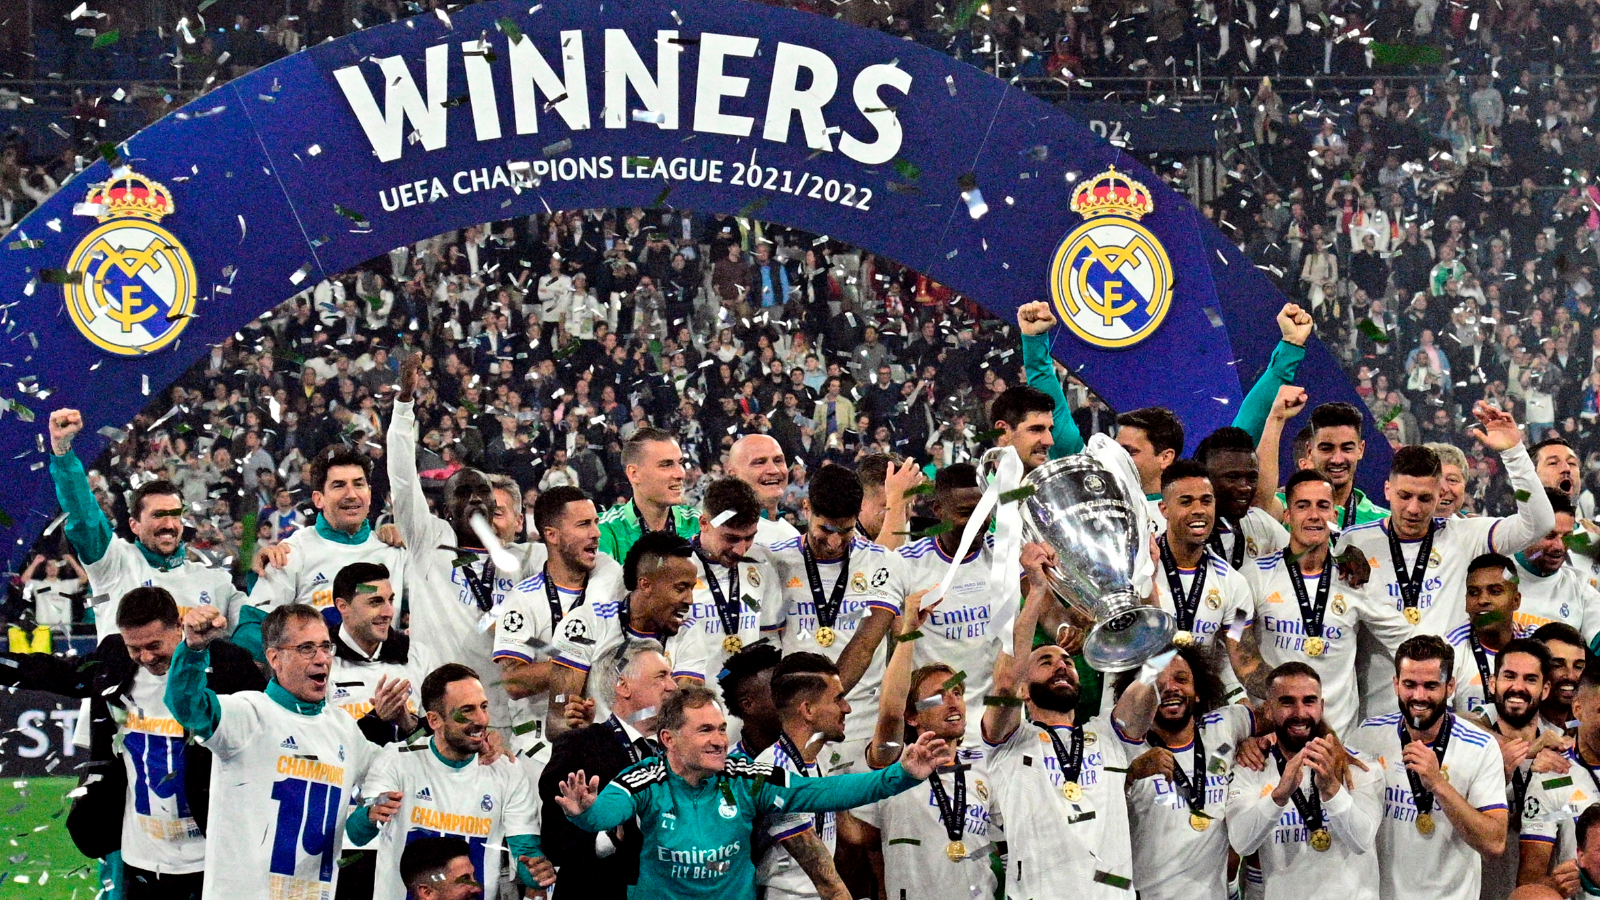 Champions League winners list by year. Who has won the most UCL titles in history?. Goal.com US